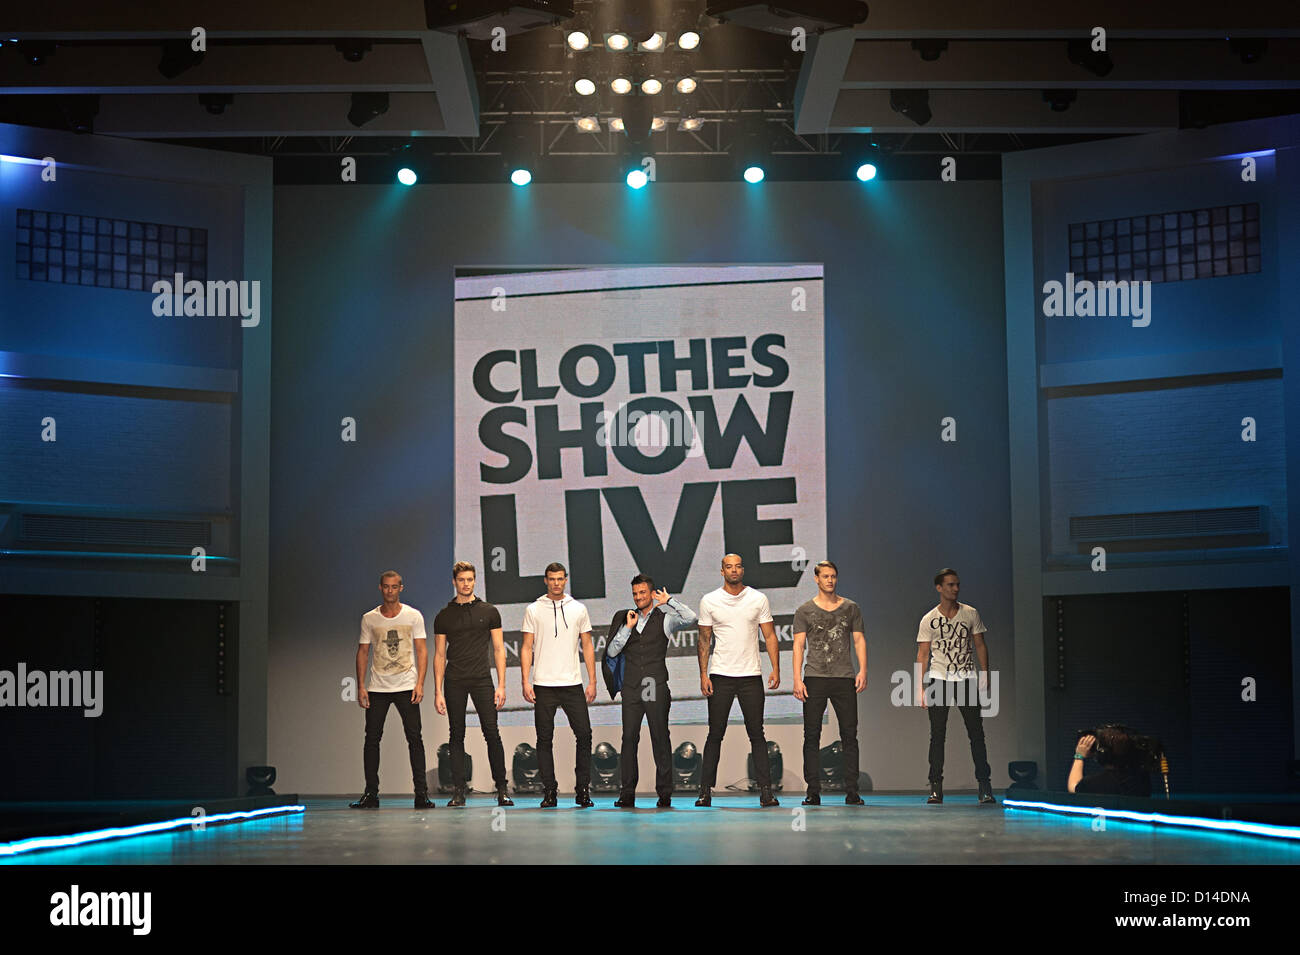 Birmingham, UK. 7th December 2012. Peter Andre launches new clothing range 'Alpha' at Clothes Show Live 2012. Credit:  Adrian Jones / Alamy Live News Stock Photo